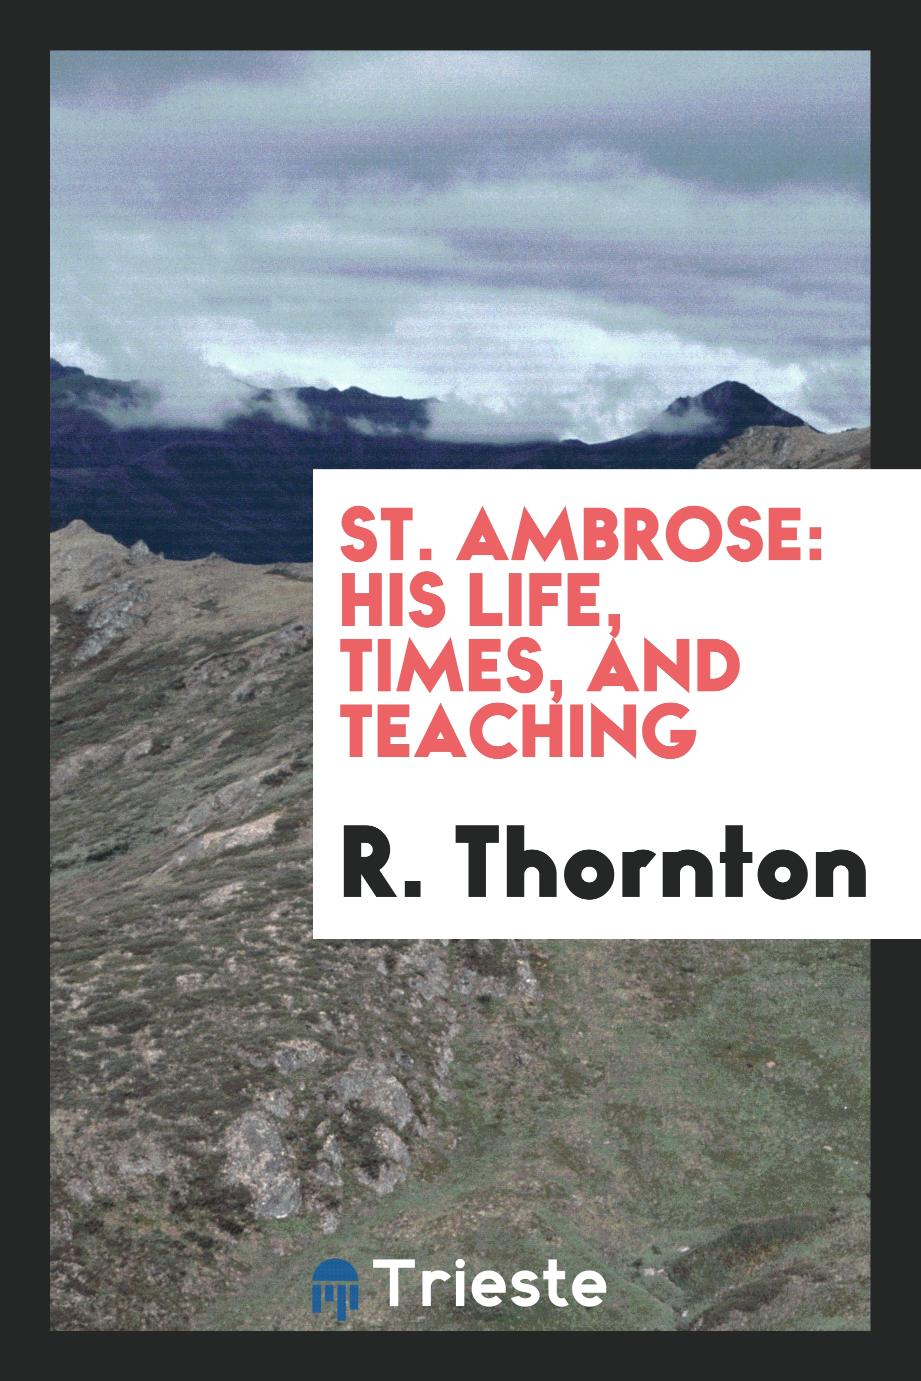 St. Ambrose: his life, times, and teaching